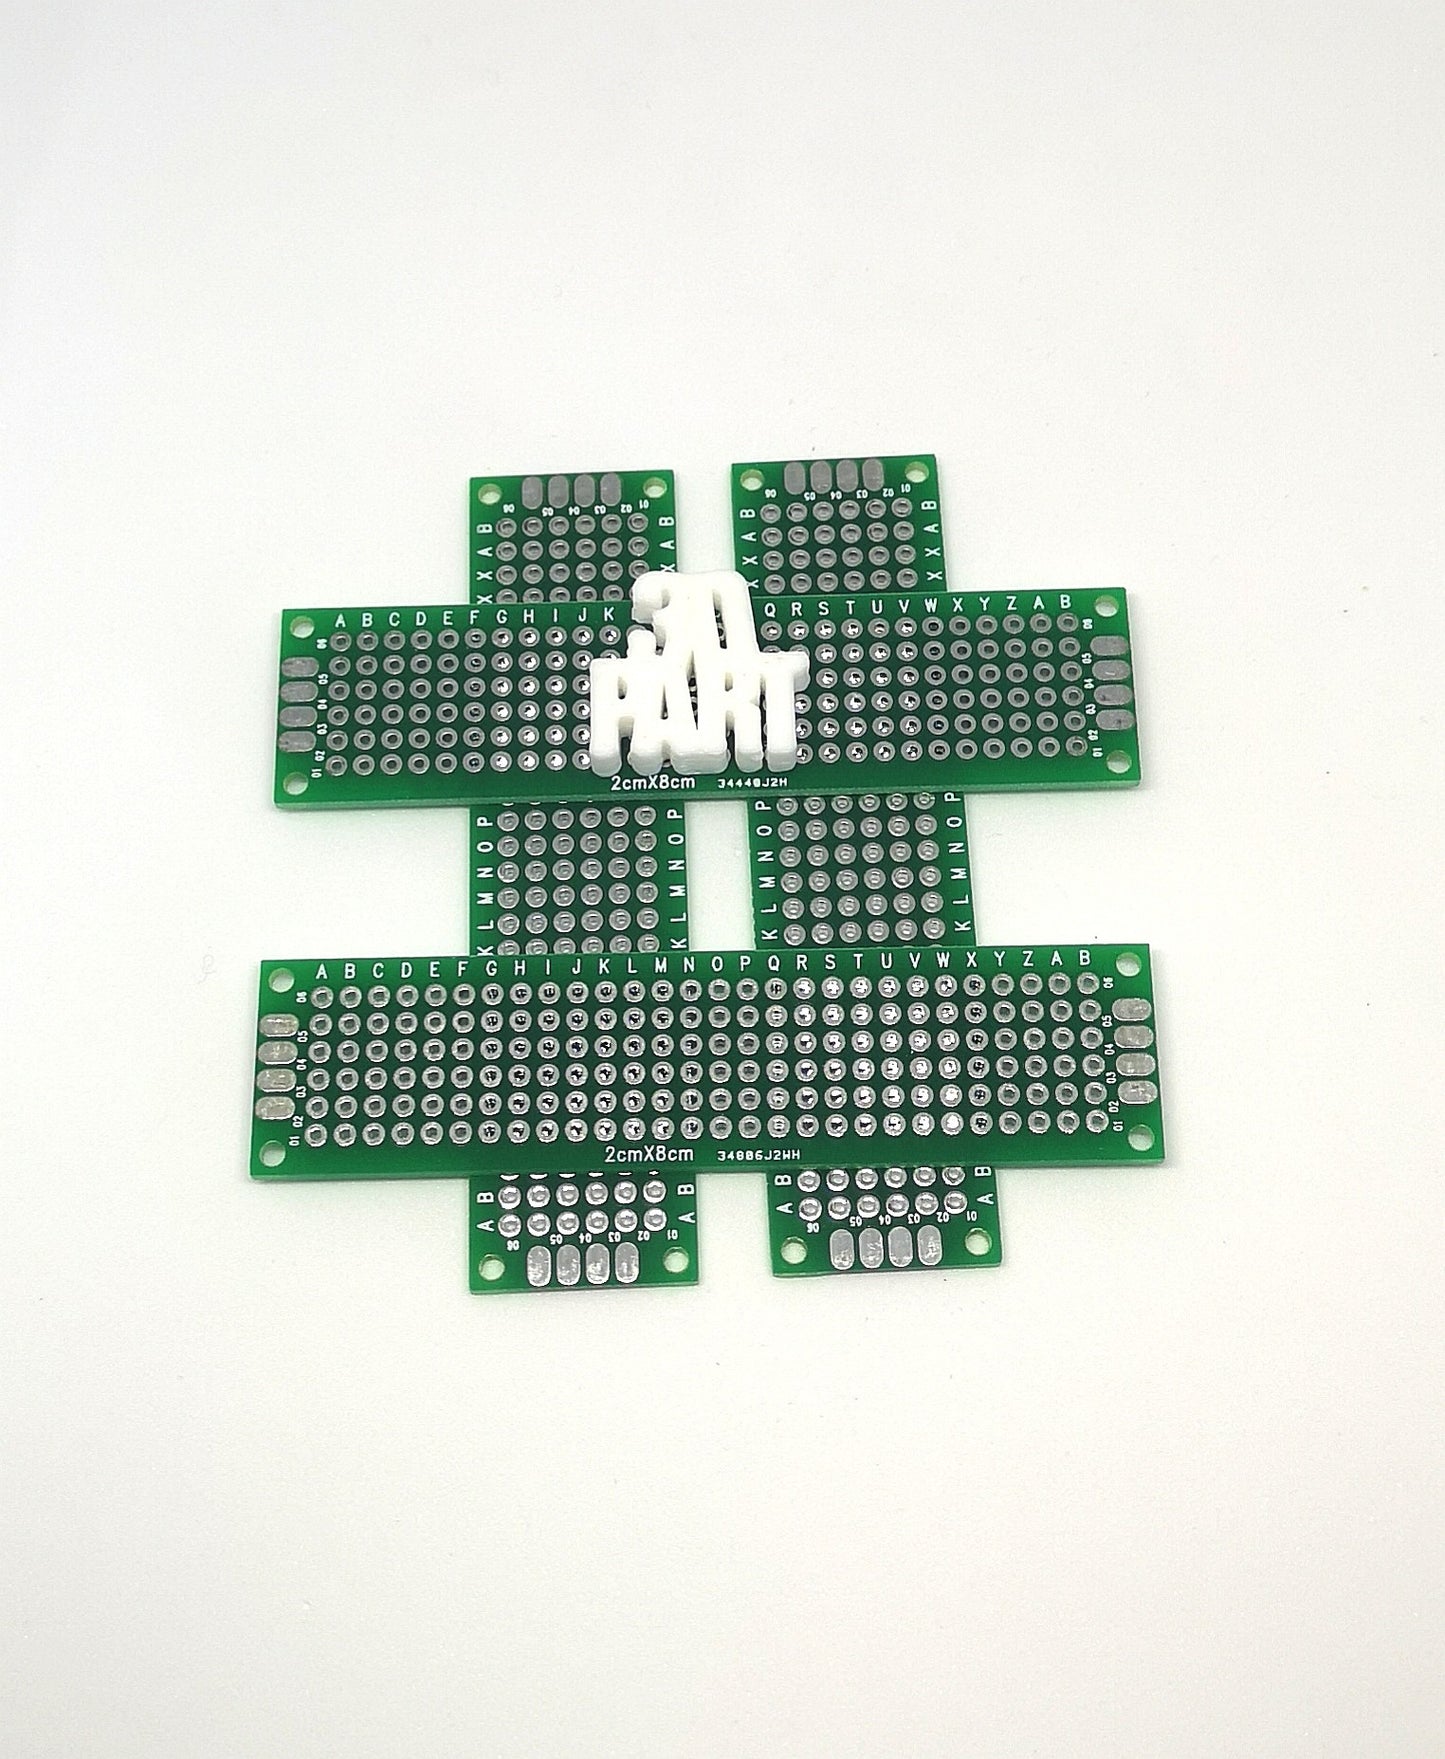 PCB with solder points